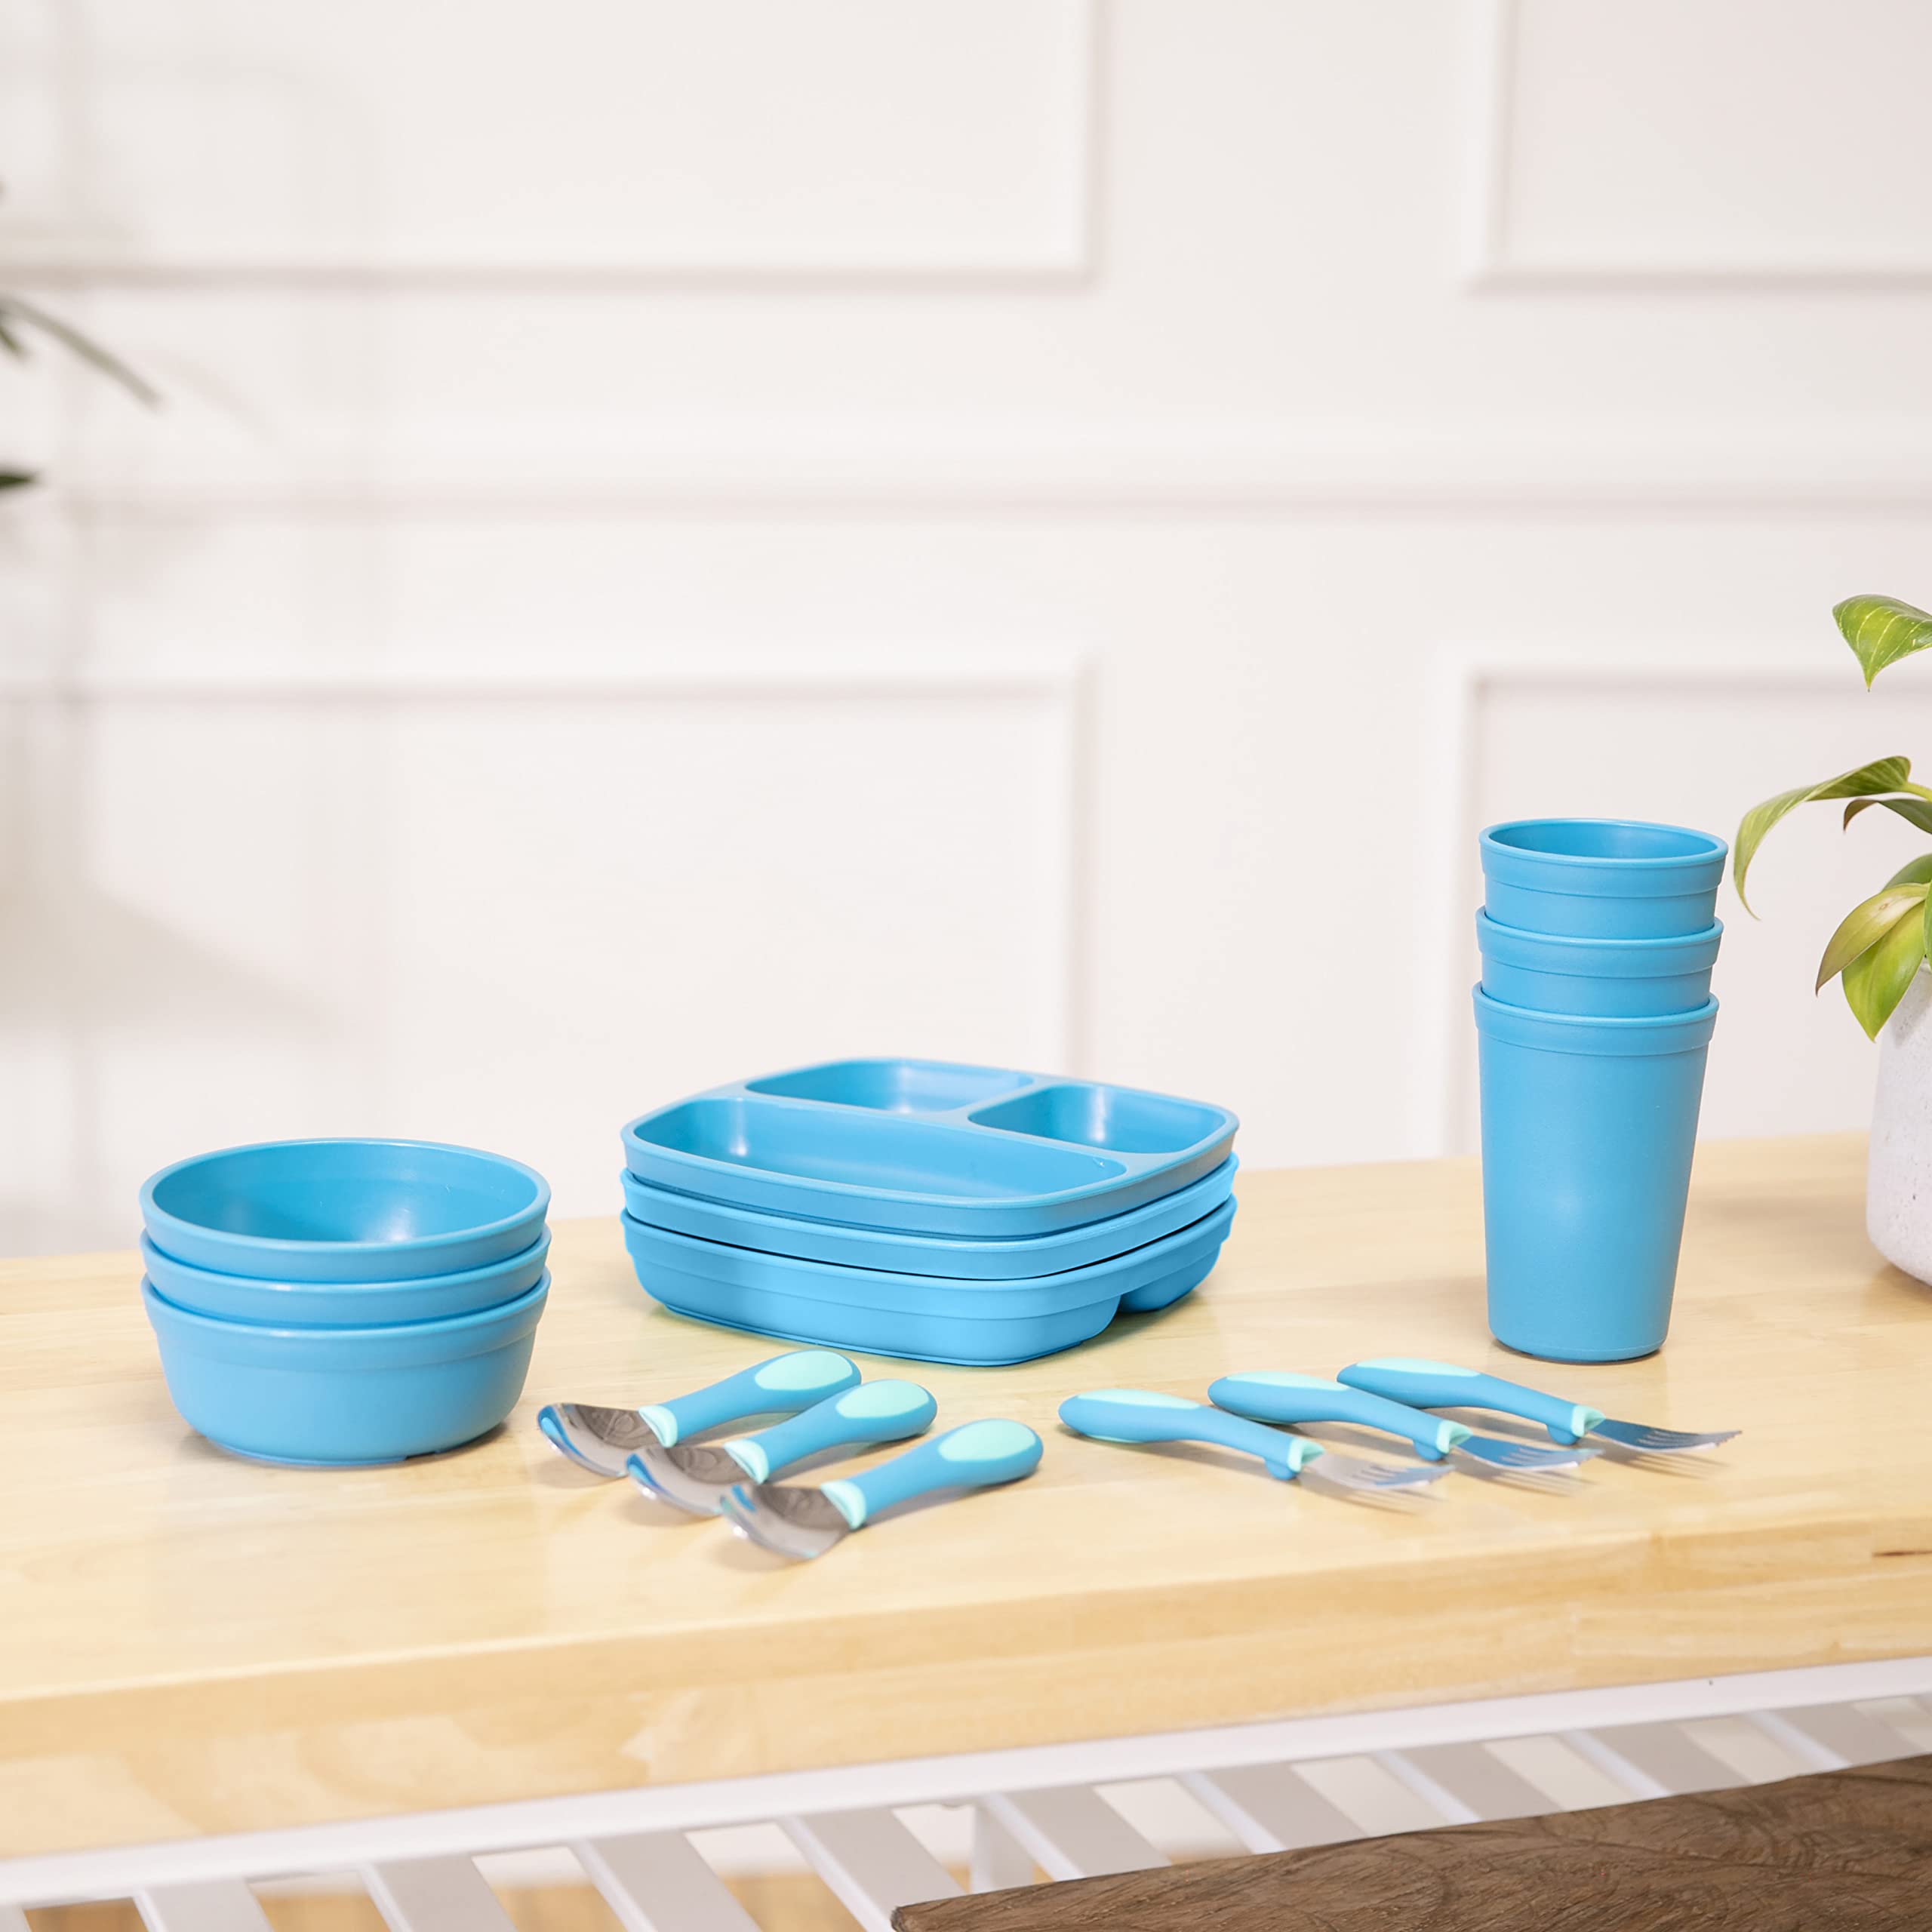 ECR4Kids My First Meal Pal Combo Set, Kids Plastic Tableware and Utensils, Children's Divided Plates, Bowls, Cups, Stainless Steel Spoons and Forks, Stackable and Dishwasher Safe, 15-Piece - Teal